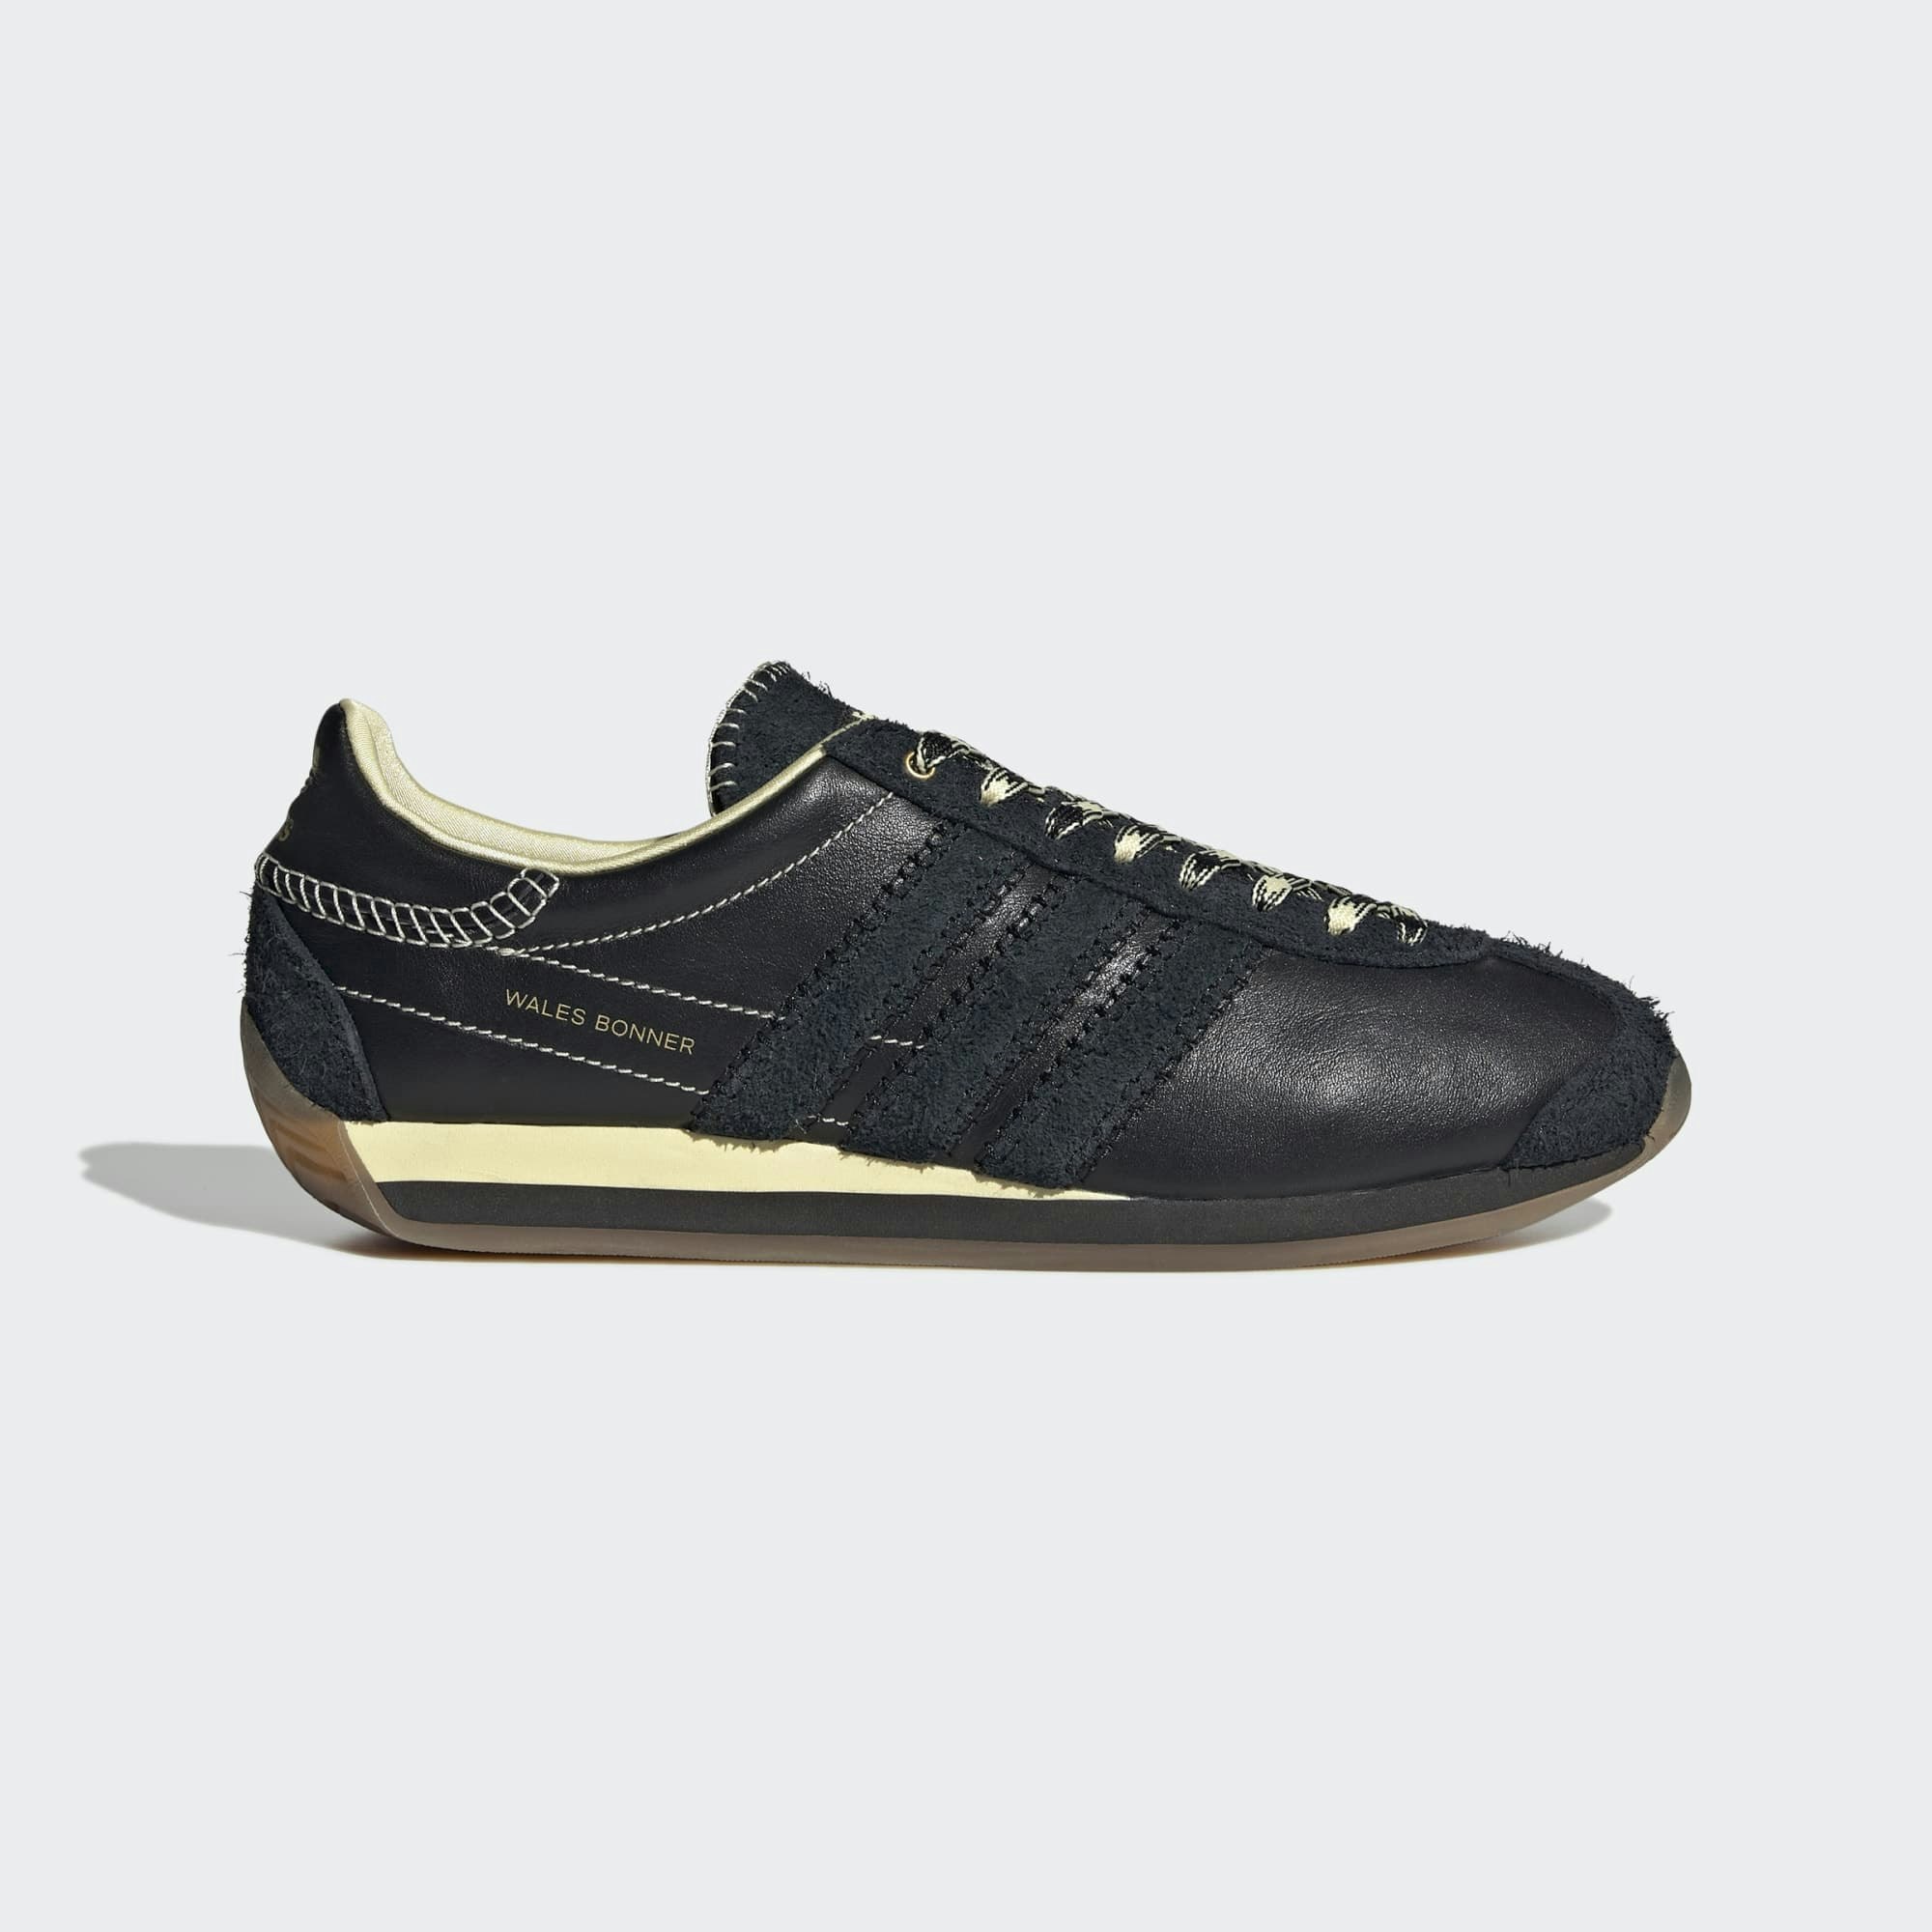 Wales Bonner x adidas Country "Core Black"